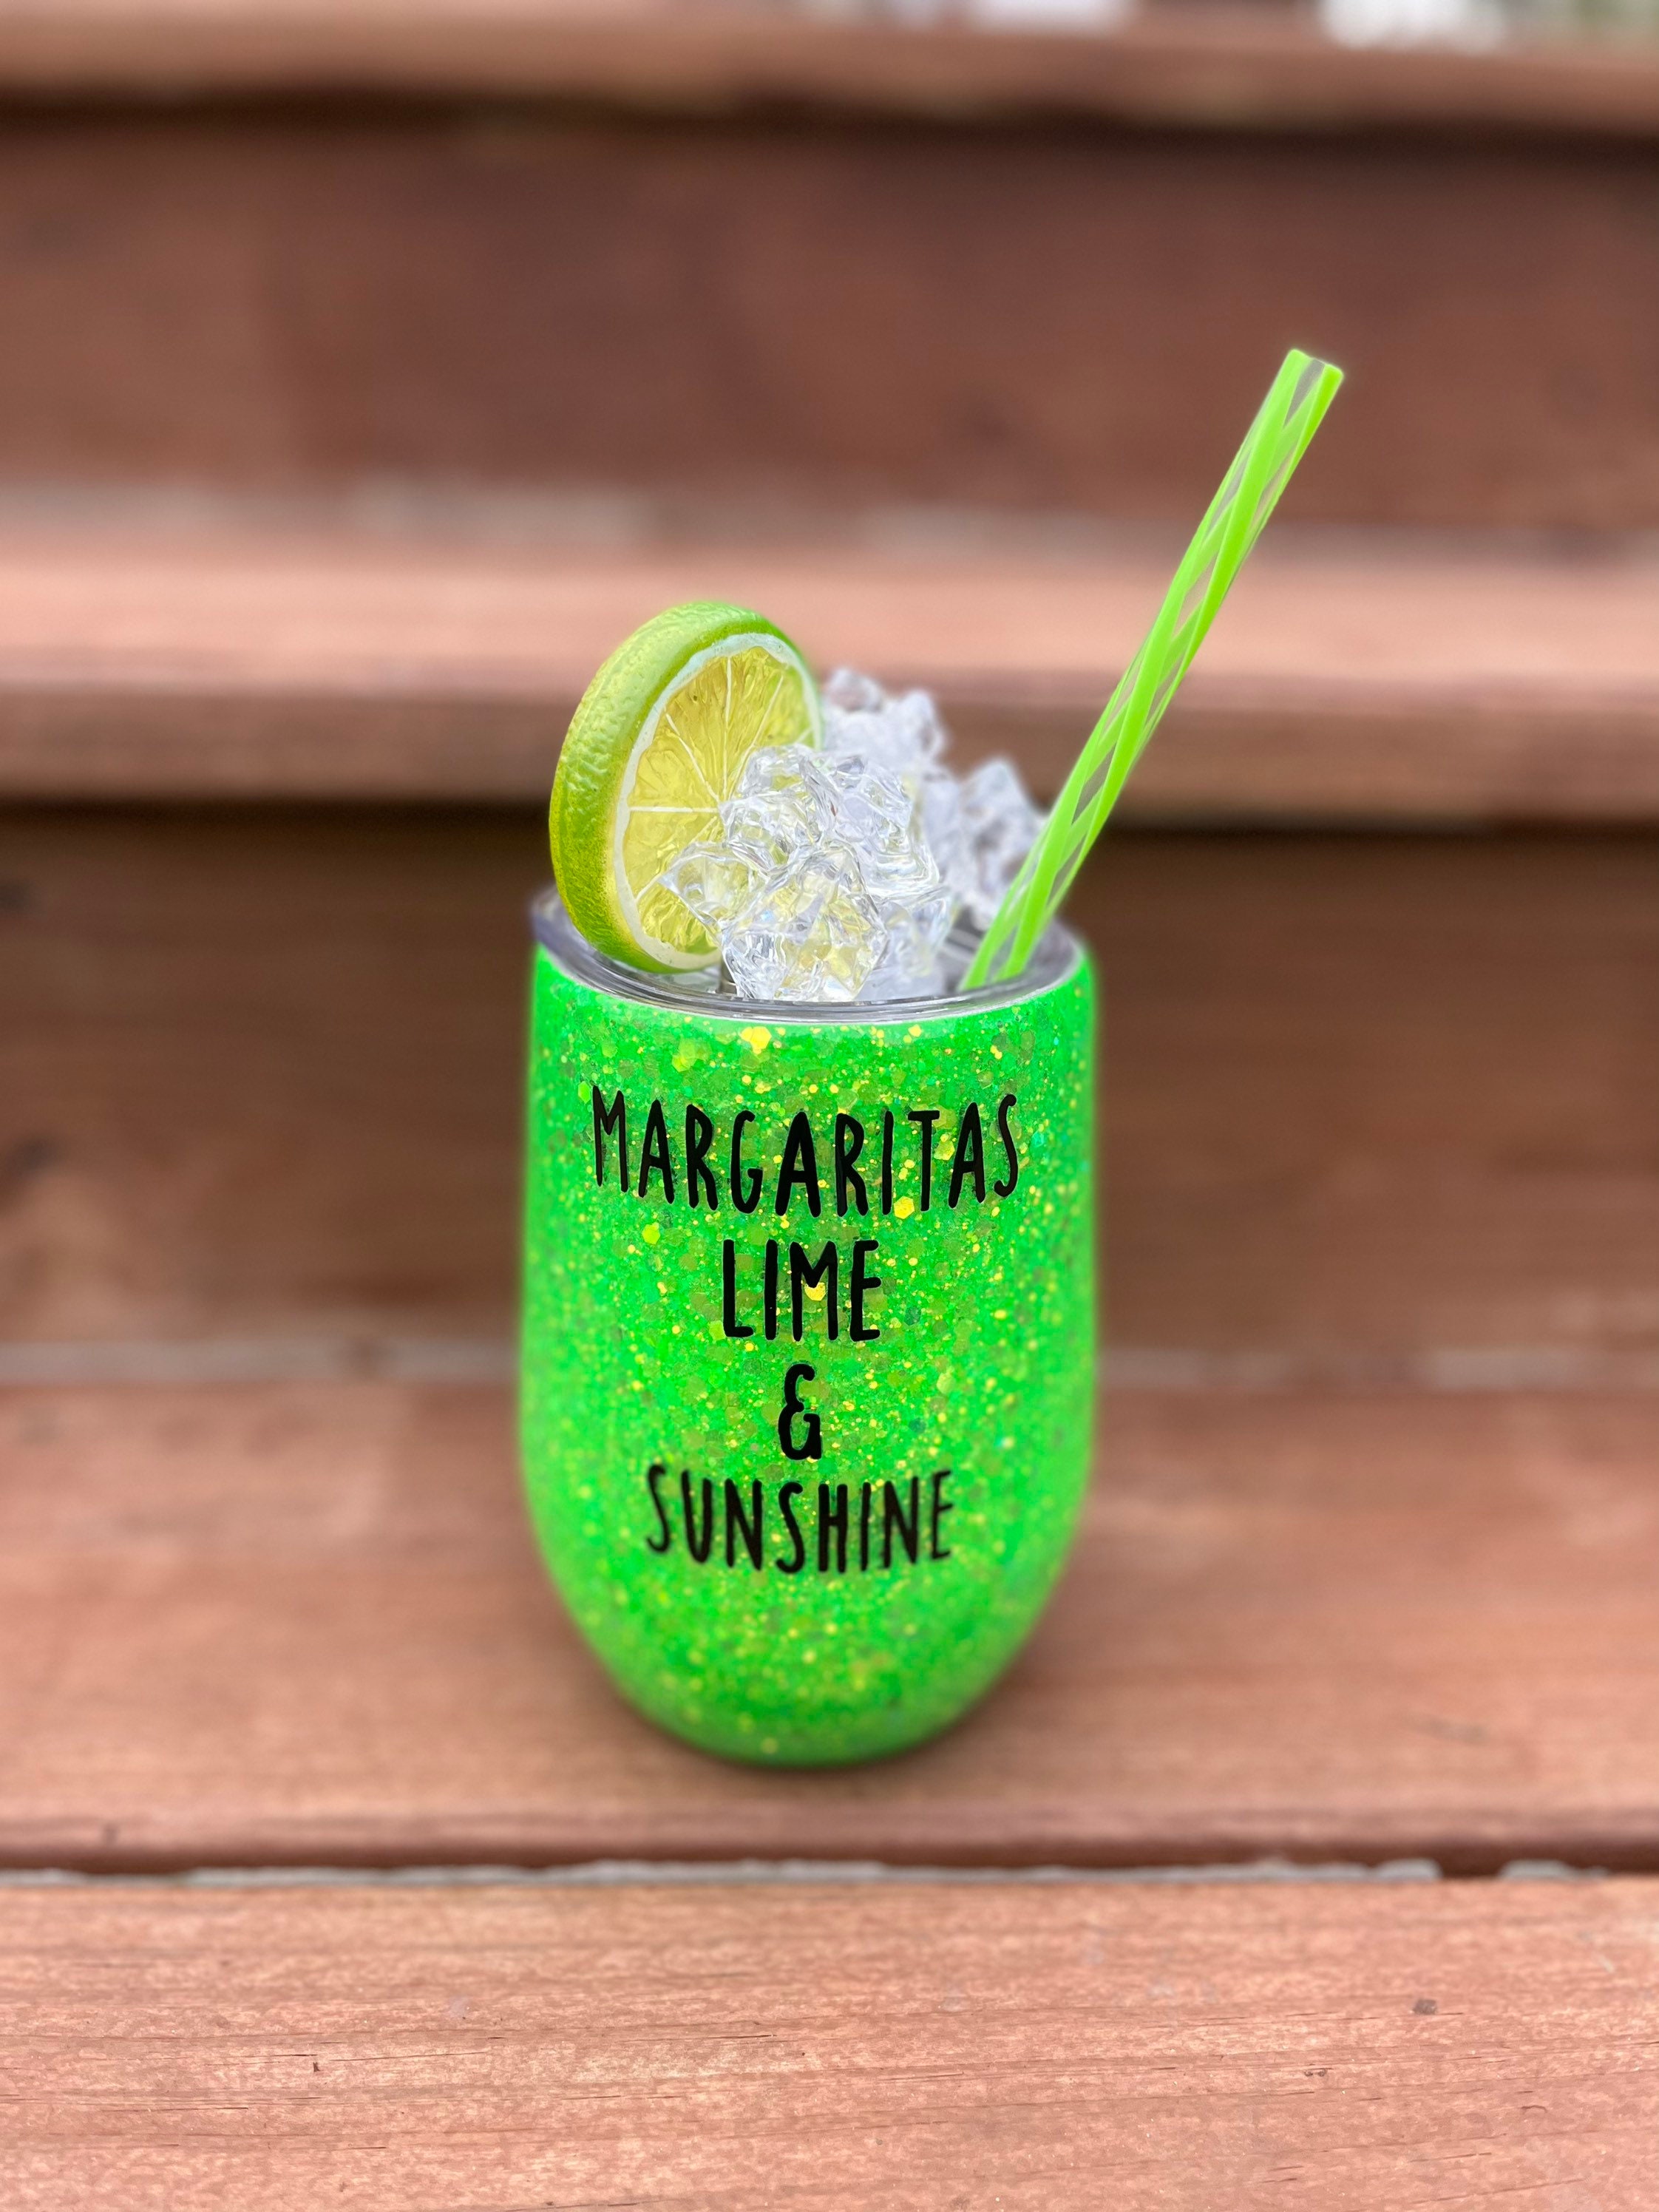 Mamacita Needs A Margarita Tumbler Insulated Cup for Cold Drinks  Personalized Gift for Mom or Friend Perfect for Summer 